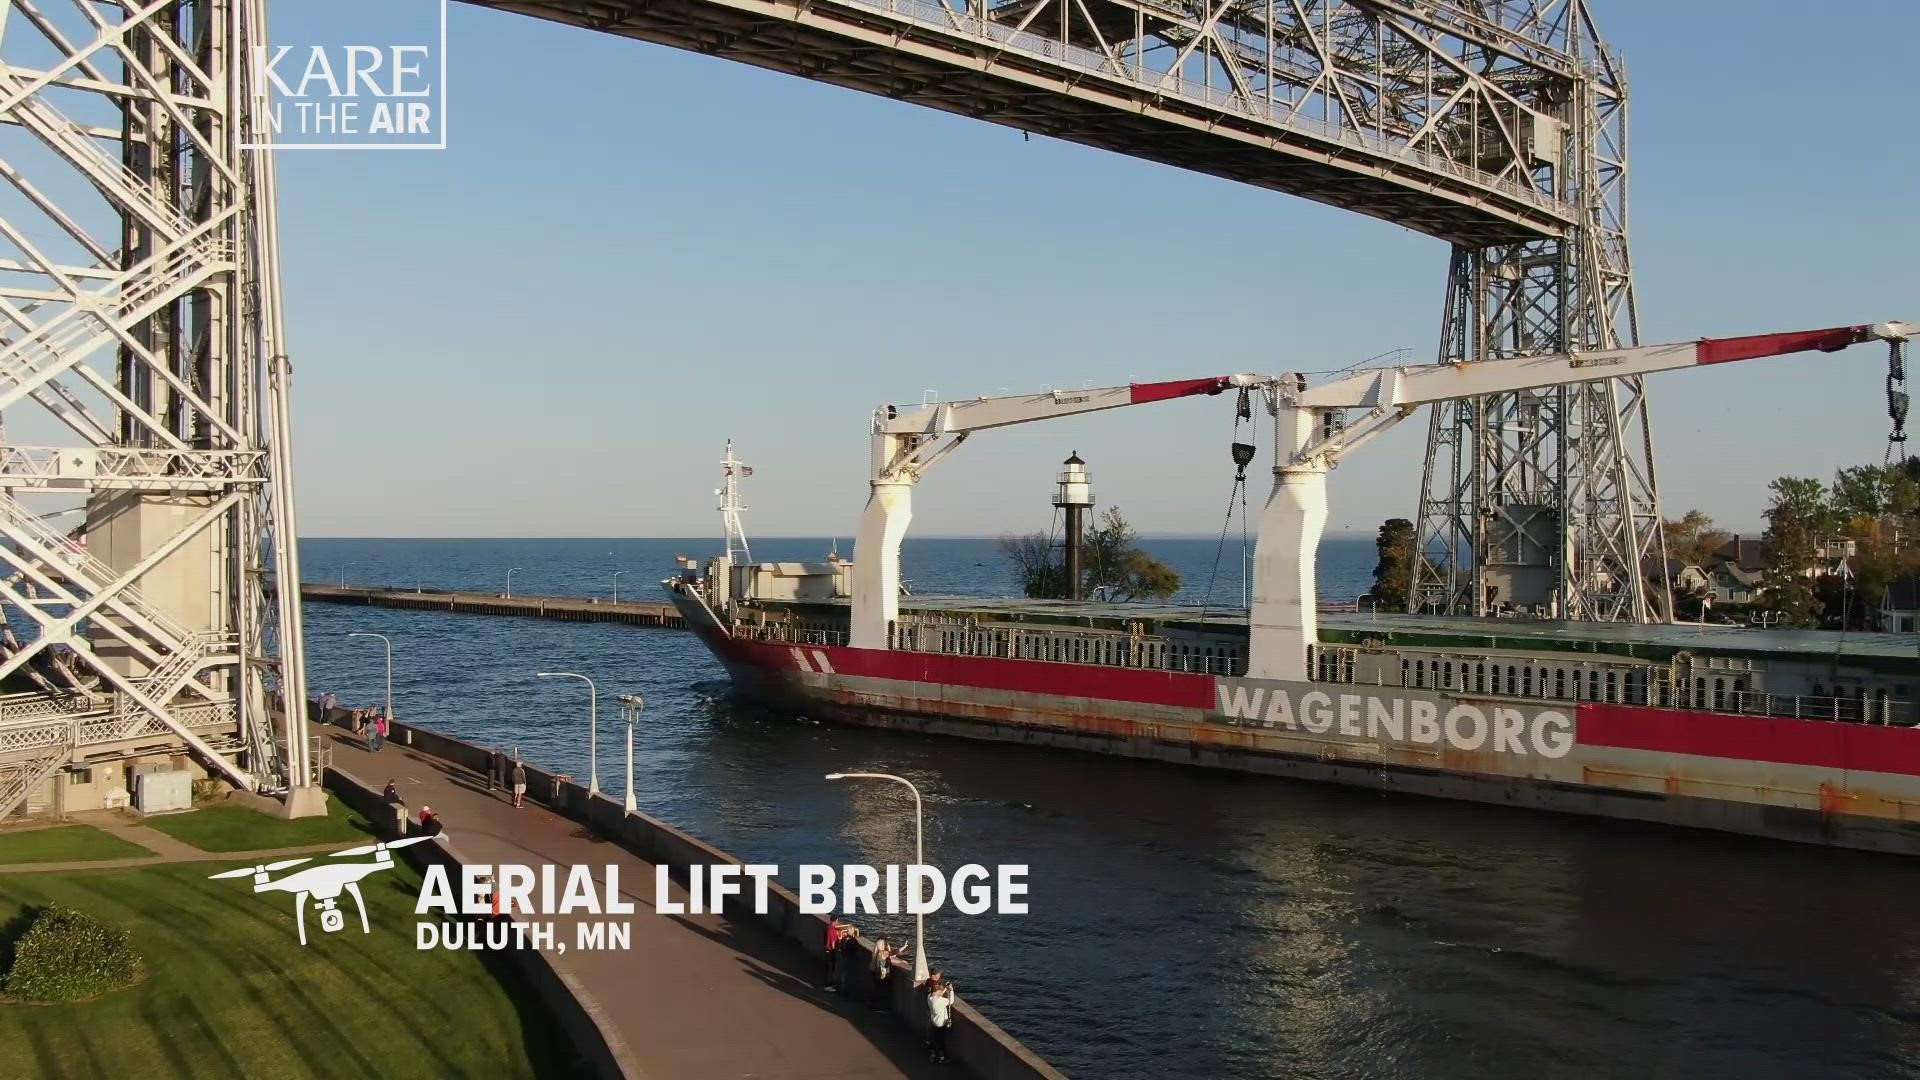 Our drone tour of Lake Superior's spectacular North Shore continues with a stop at the Duluth Aerial Lift Bridge.